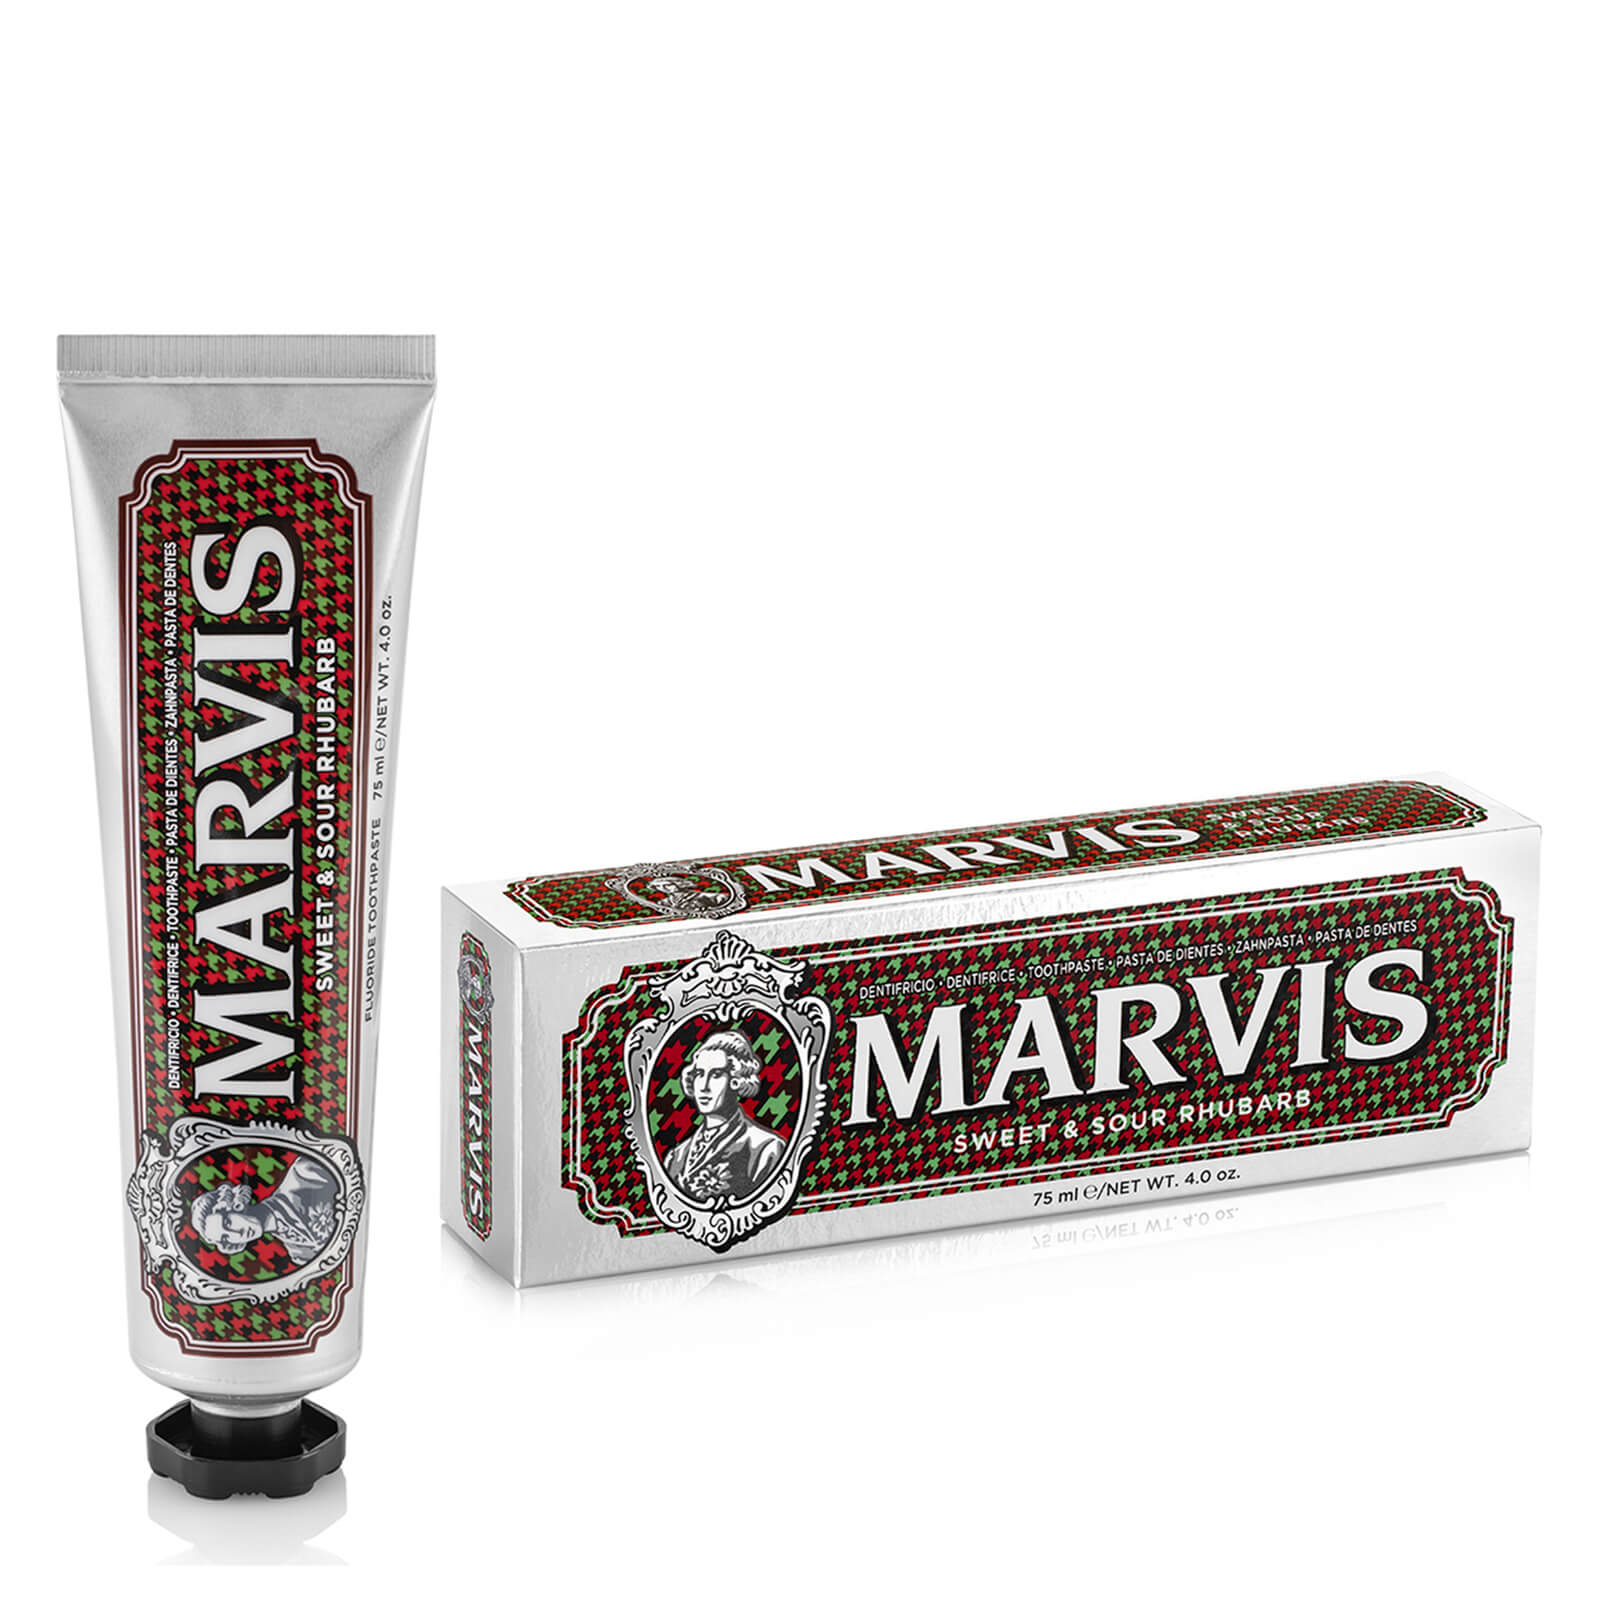 Image of Marvis Sweet & Sour Rhubarb Toothpaste 75ml